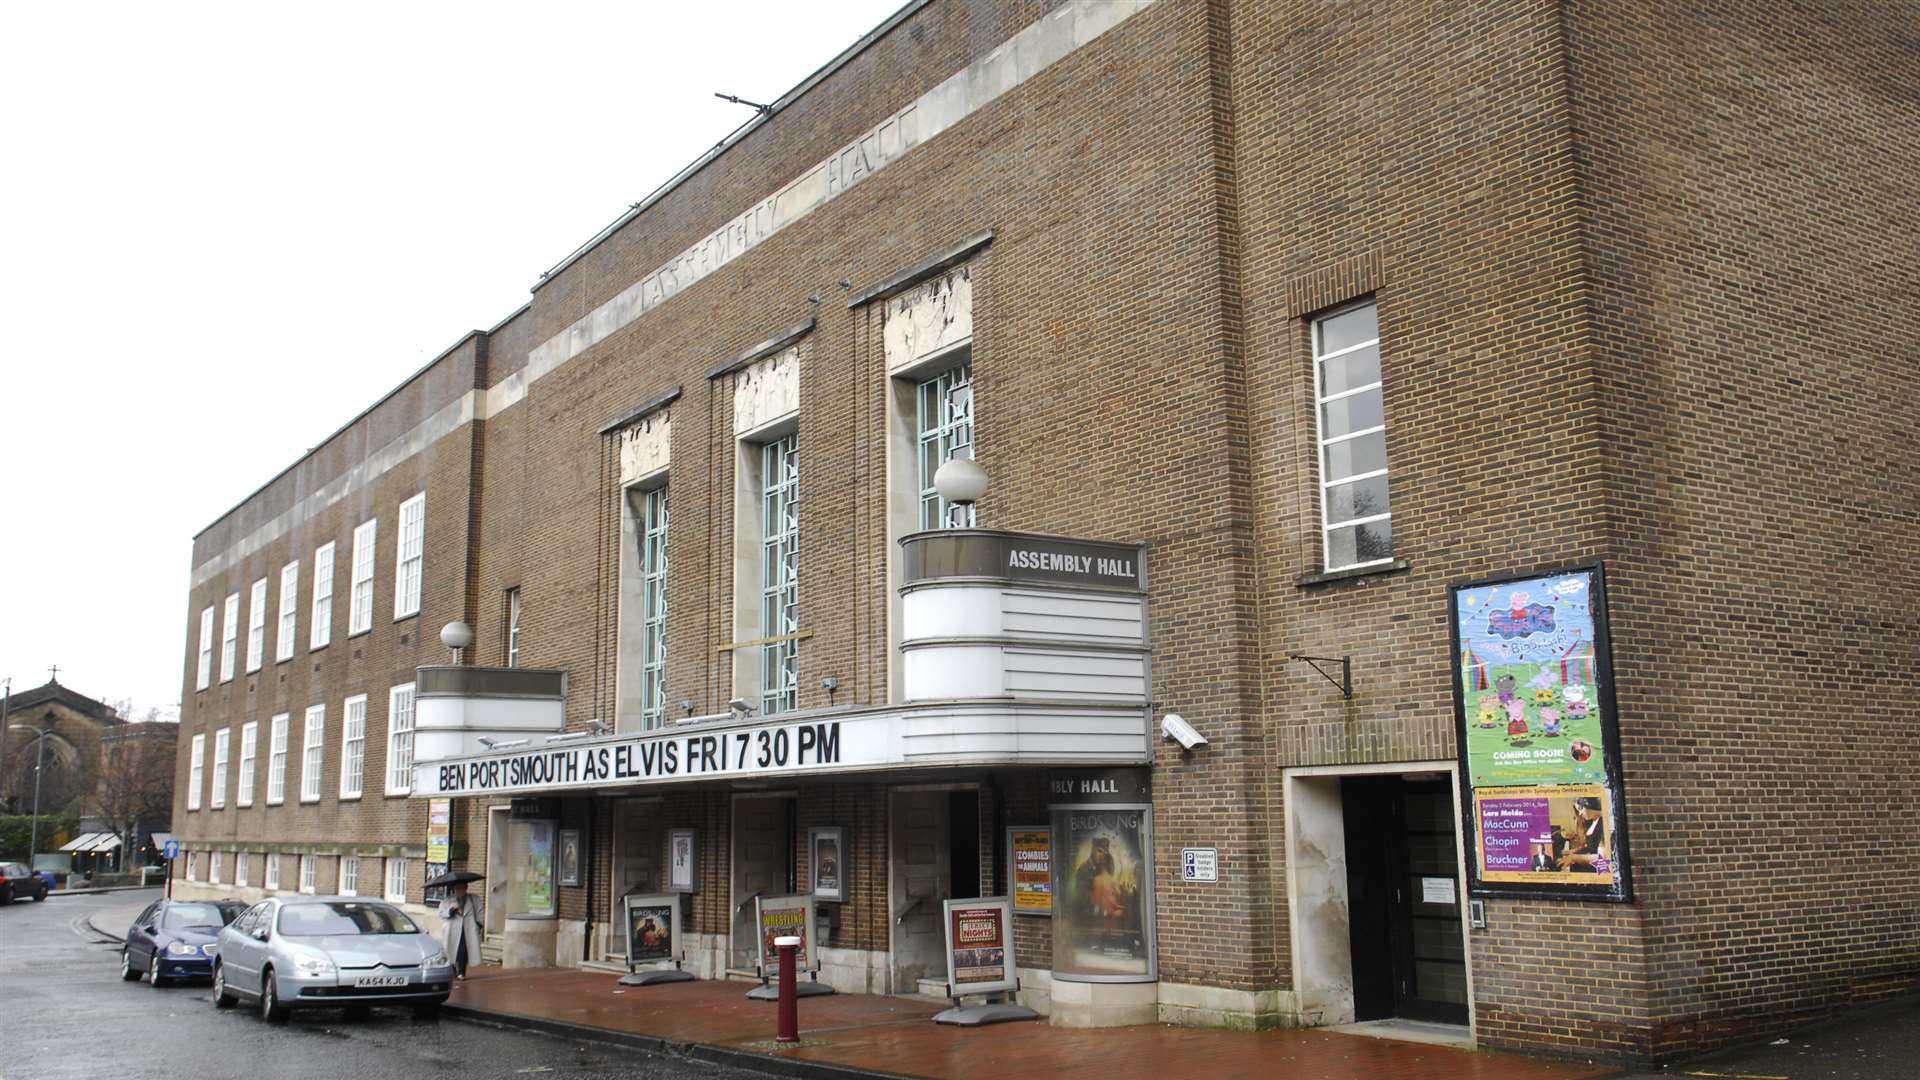 The Assembly Hall Theatre in Tunbridge Wells